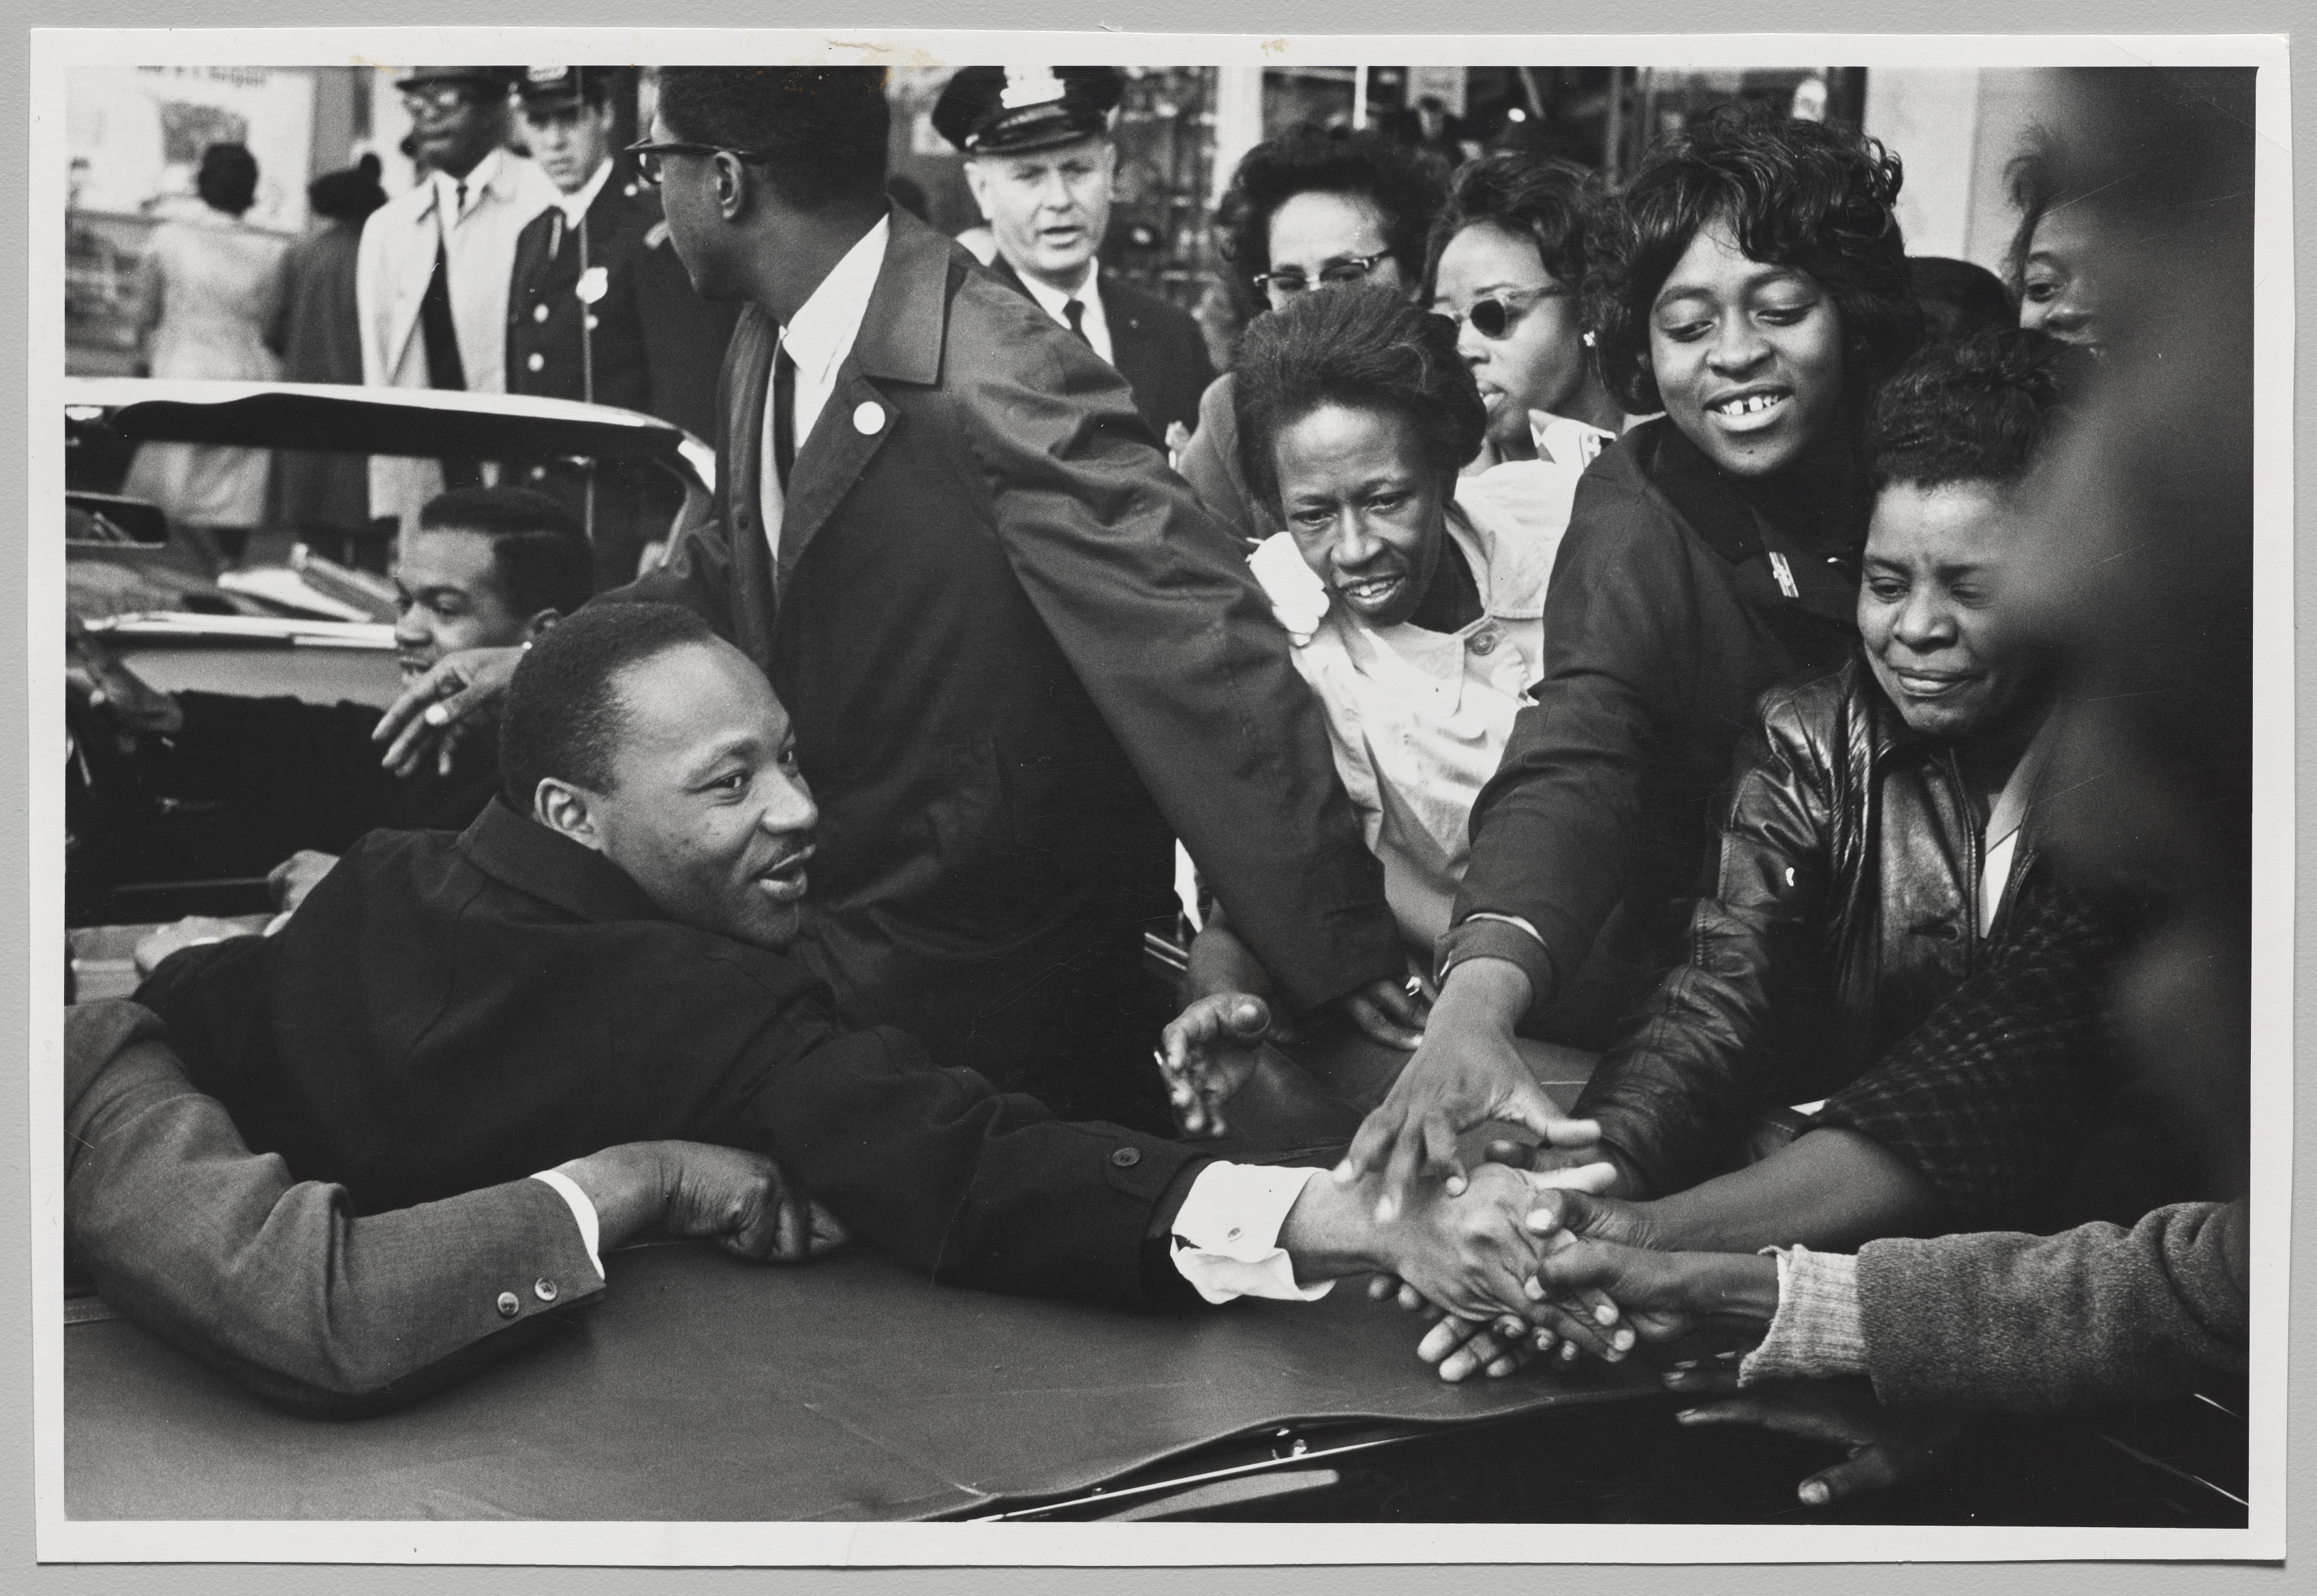 The Reverend Martin Luther King being greeted on his return to the US after being nominated for the Nobel Peace Prize, Baltimore, October 31, 1964